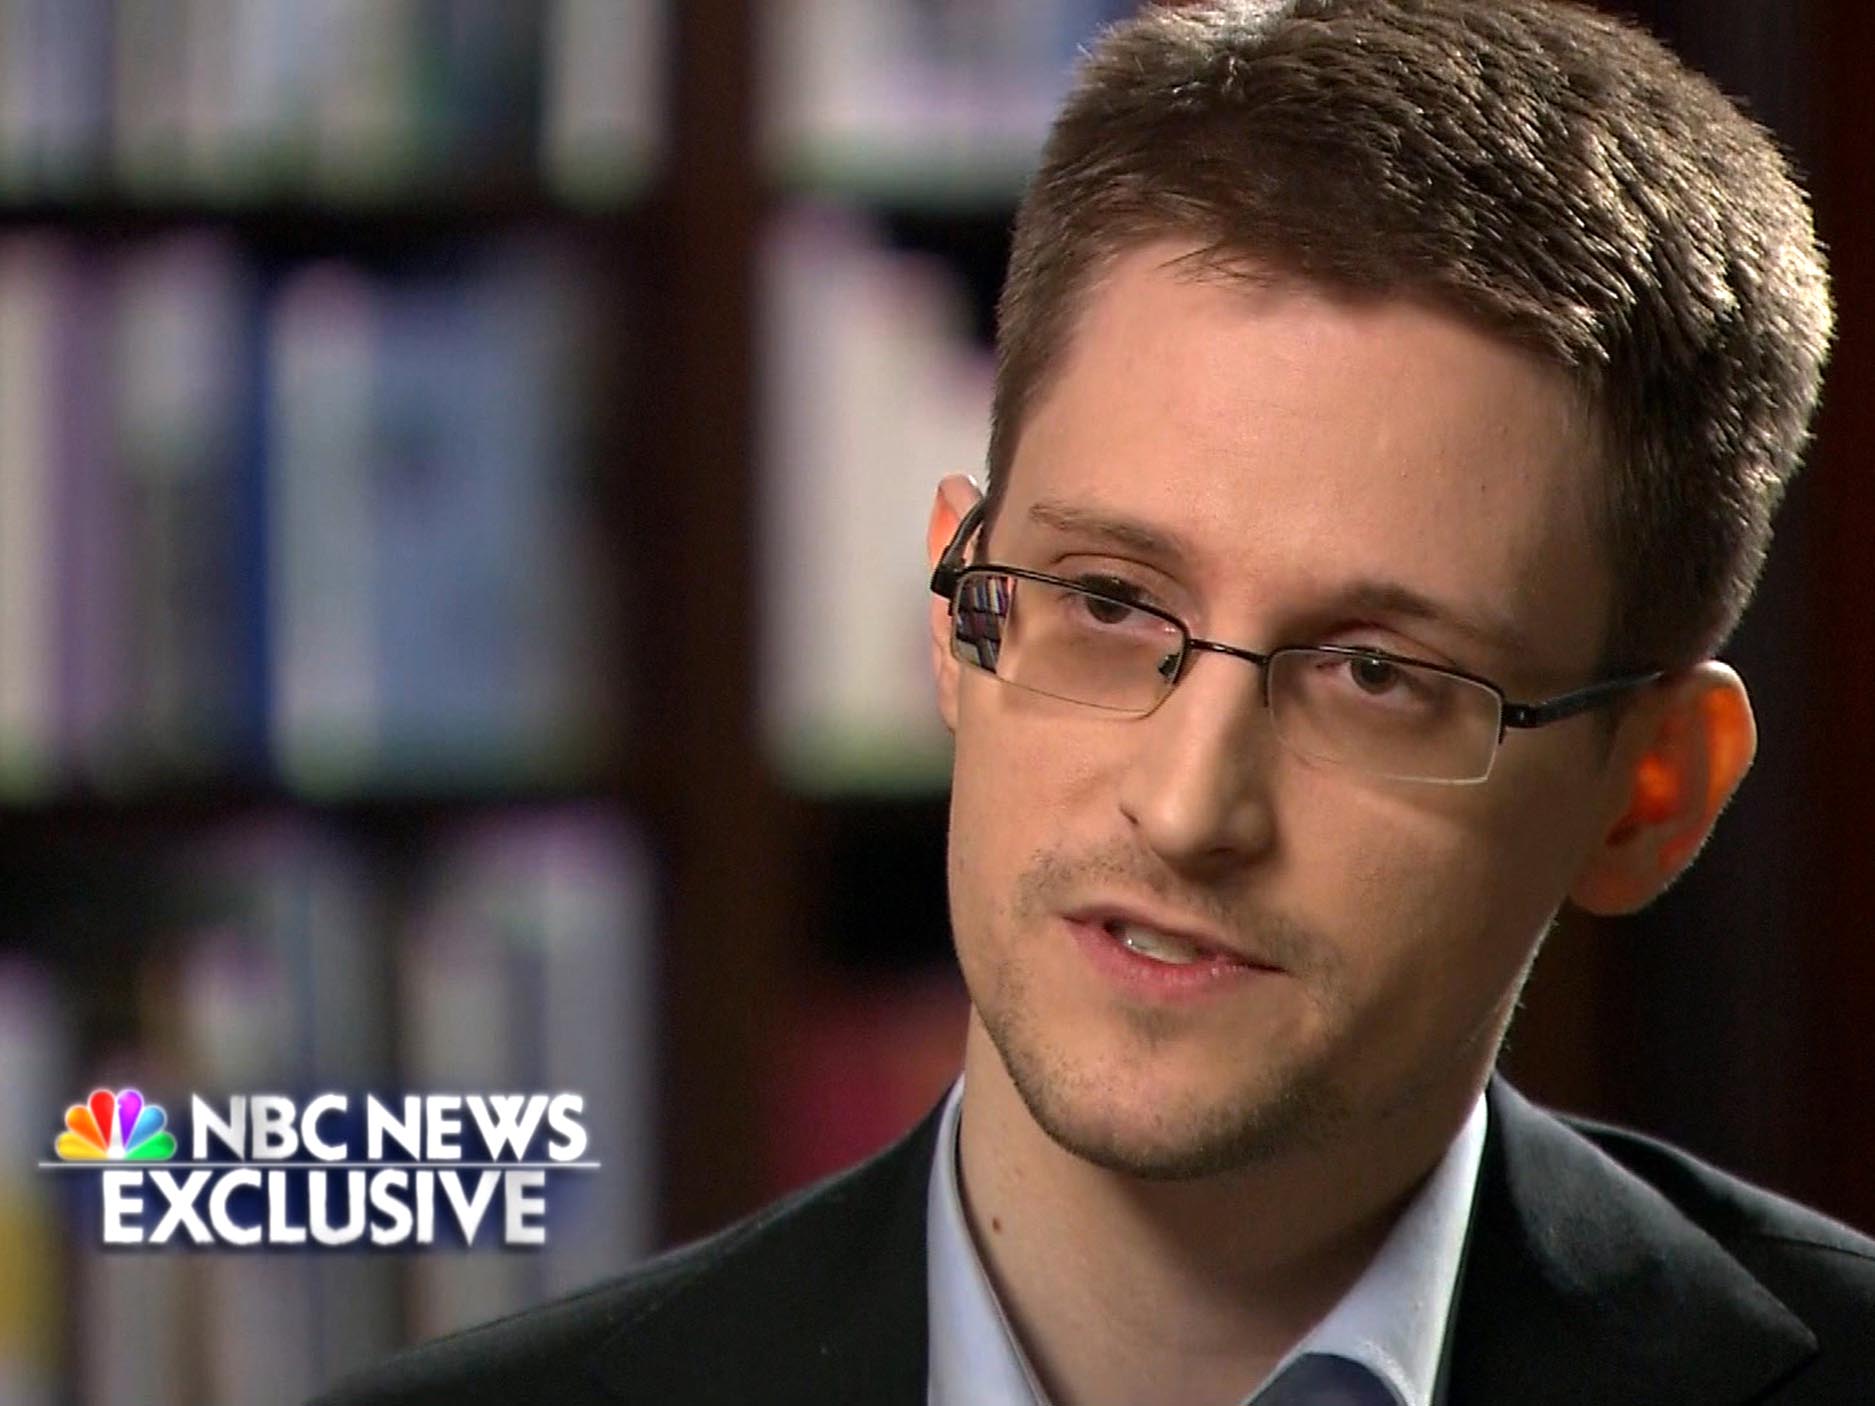 Edward Snowden speaks with Brian Williams in an NBC News exclusive interview (NBC News)